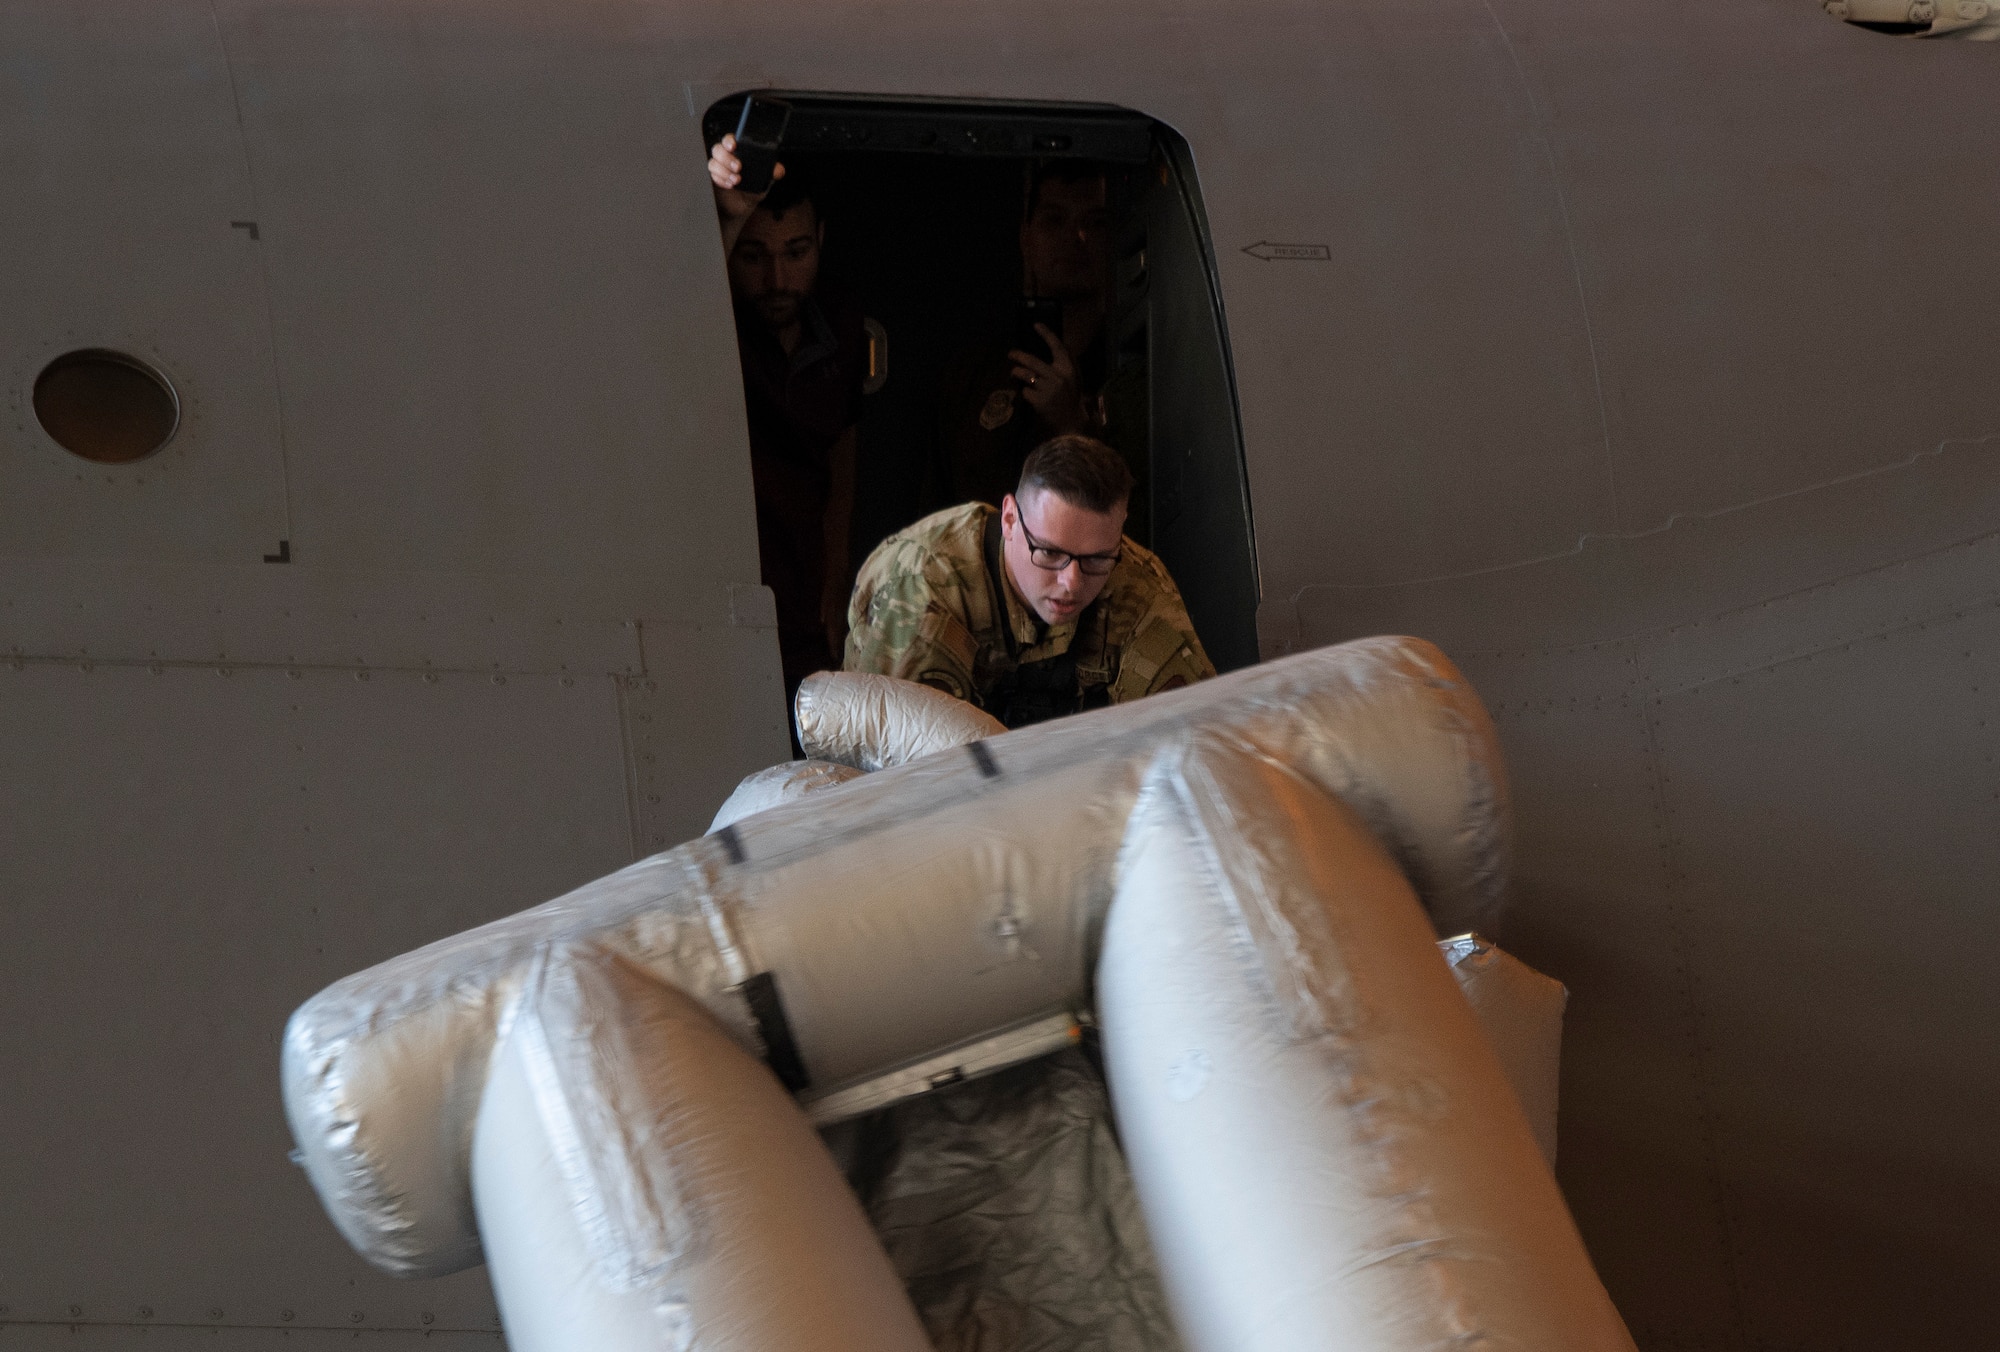 U.S. Air Force Staff Sgt. Kevin Robinson, 22nd Airlift Squadron loadmaster evaluator, deploys a C-5M Super Galaxy emergency escape slide Sept. 6, 2019, at Travis Air Force Base, California. Robinson wore a GoPro camera to record footage of the process to be used in development of a virtual reality training program on aircraft procedures. (U.S. Air Force photo by Heide Couch)